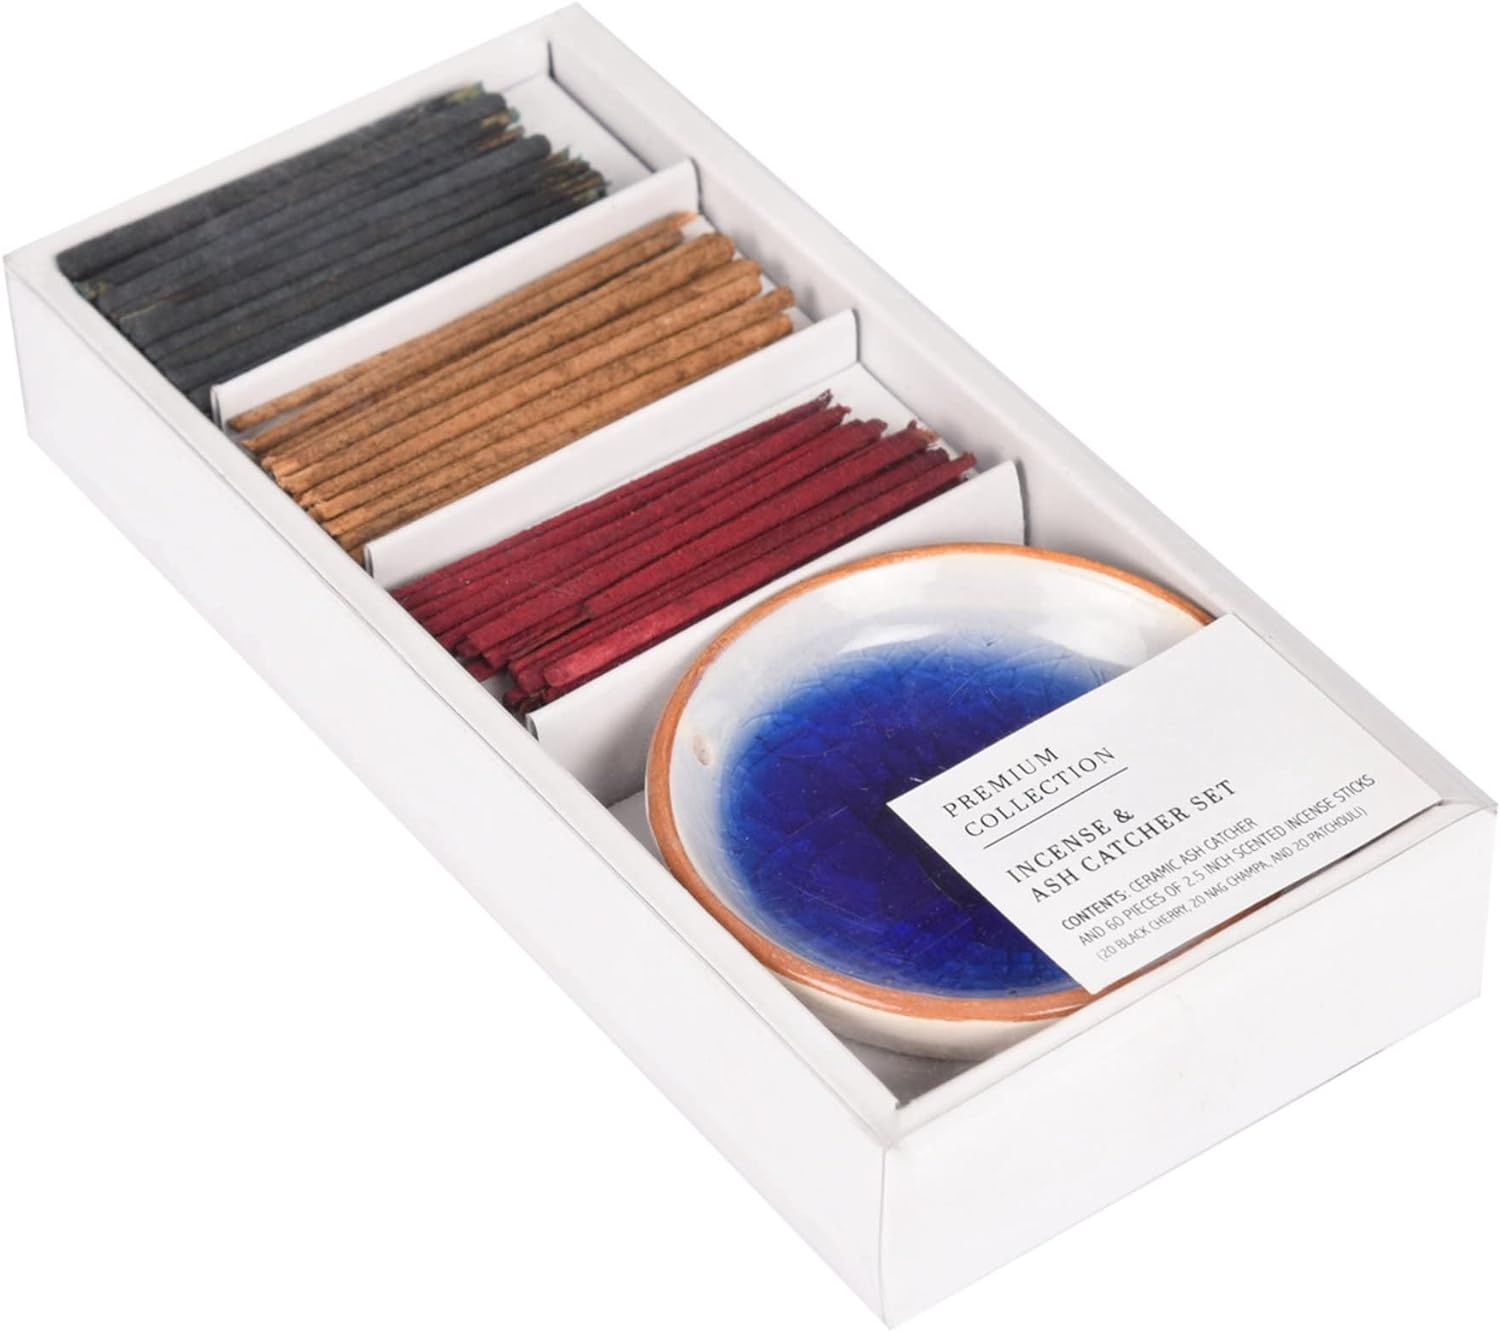 Incense Gift Set with Holder, Fragrance Oil-Incense Stick, Black Cherry, Nag Champa and Patchouli Leaves